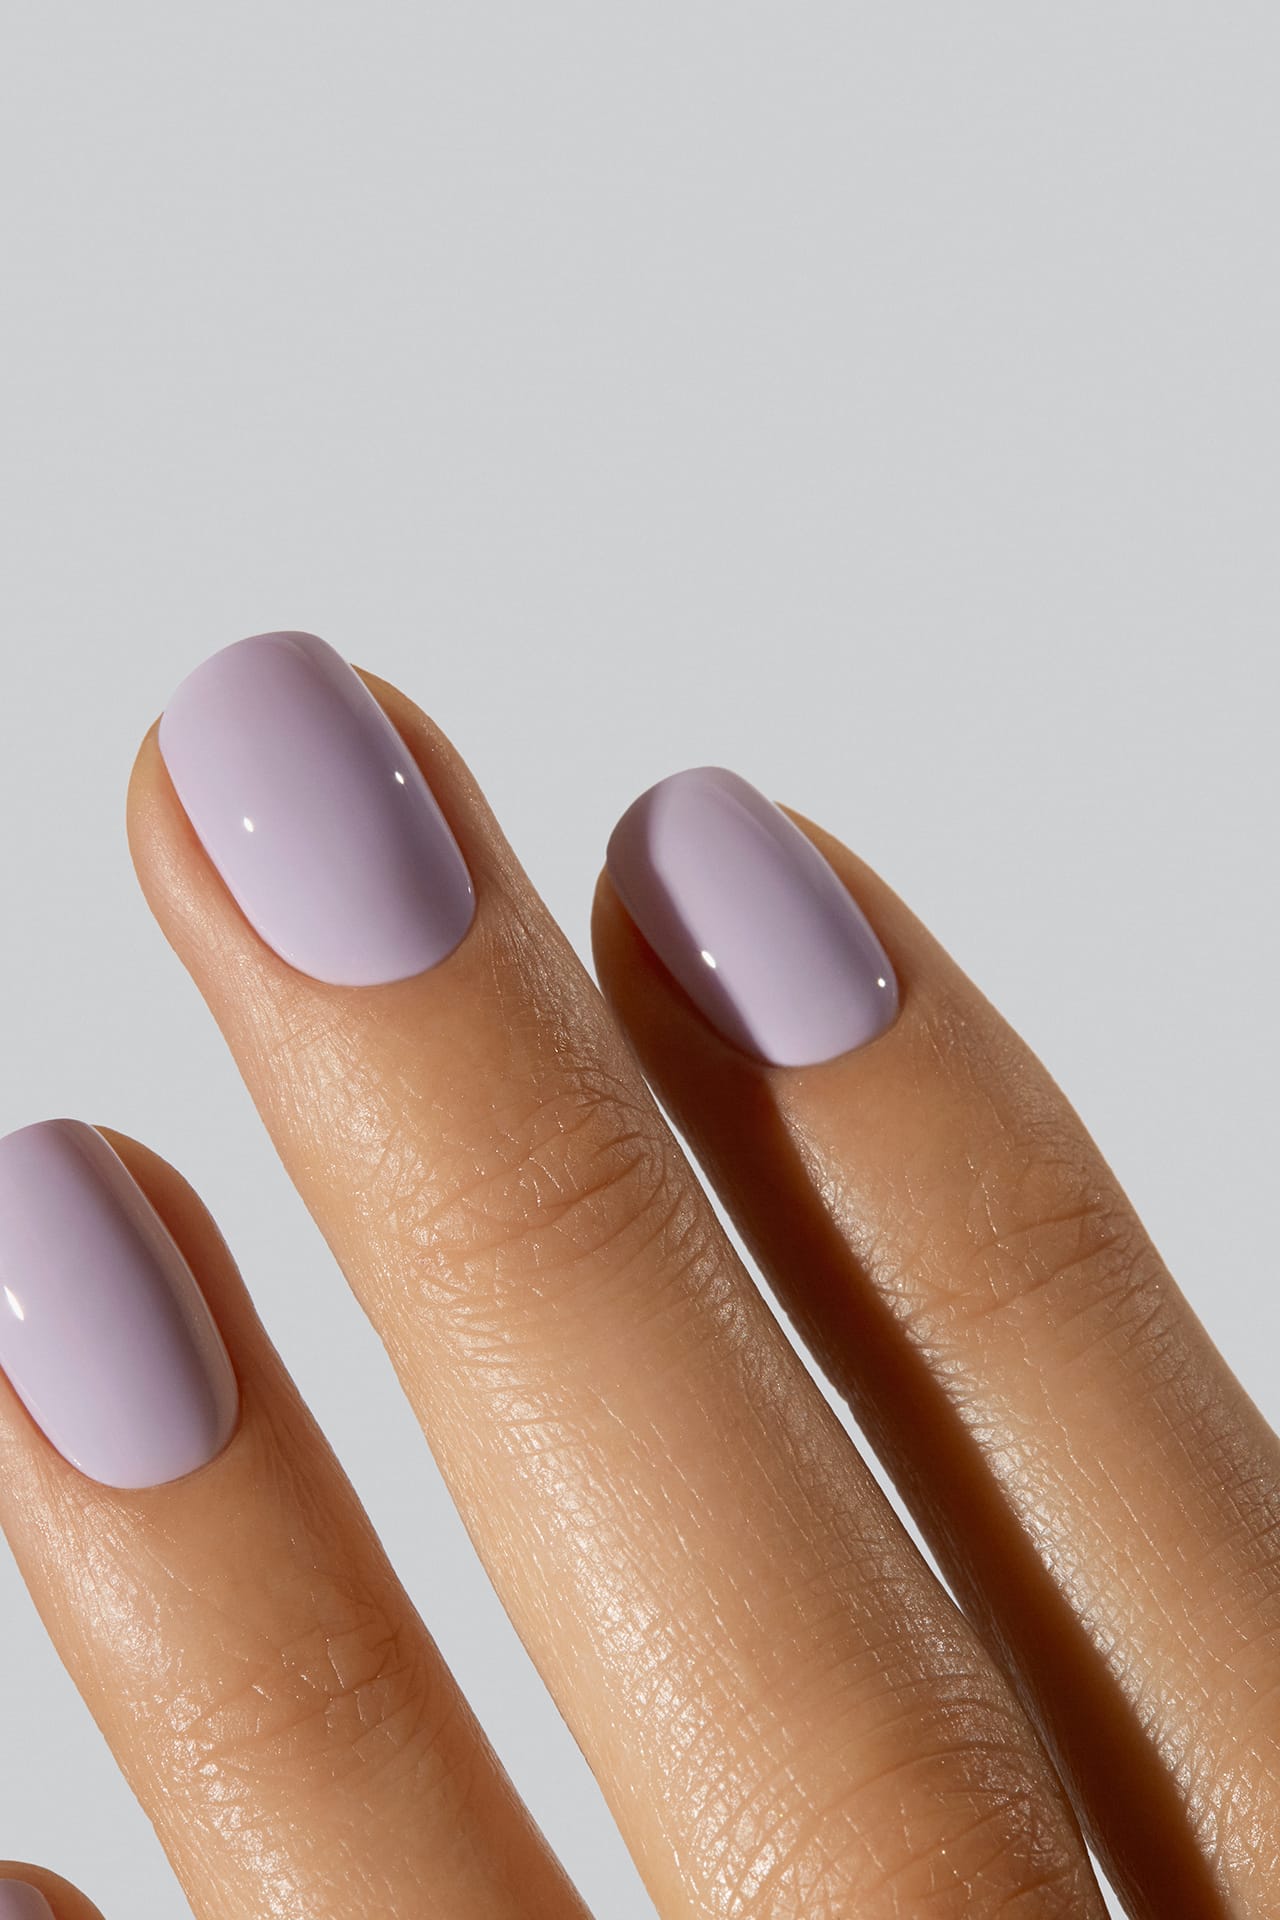 What color nail polish goes with everything? - Quora